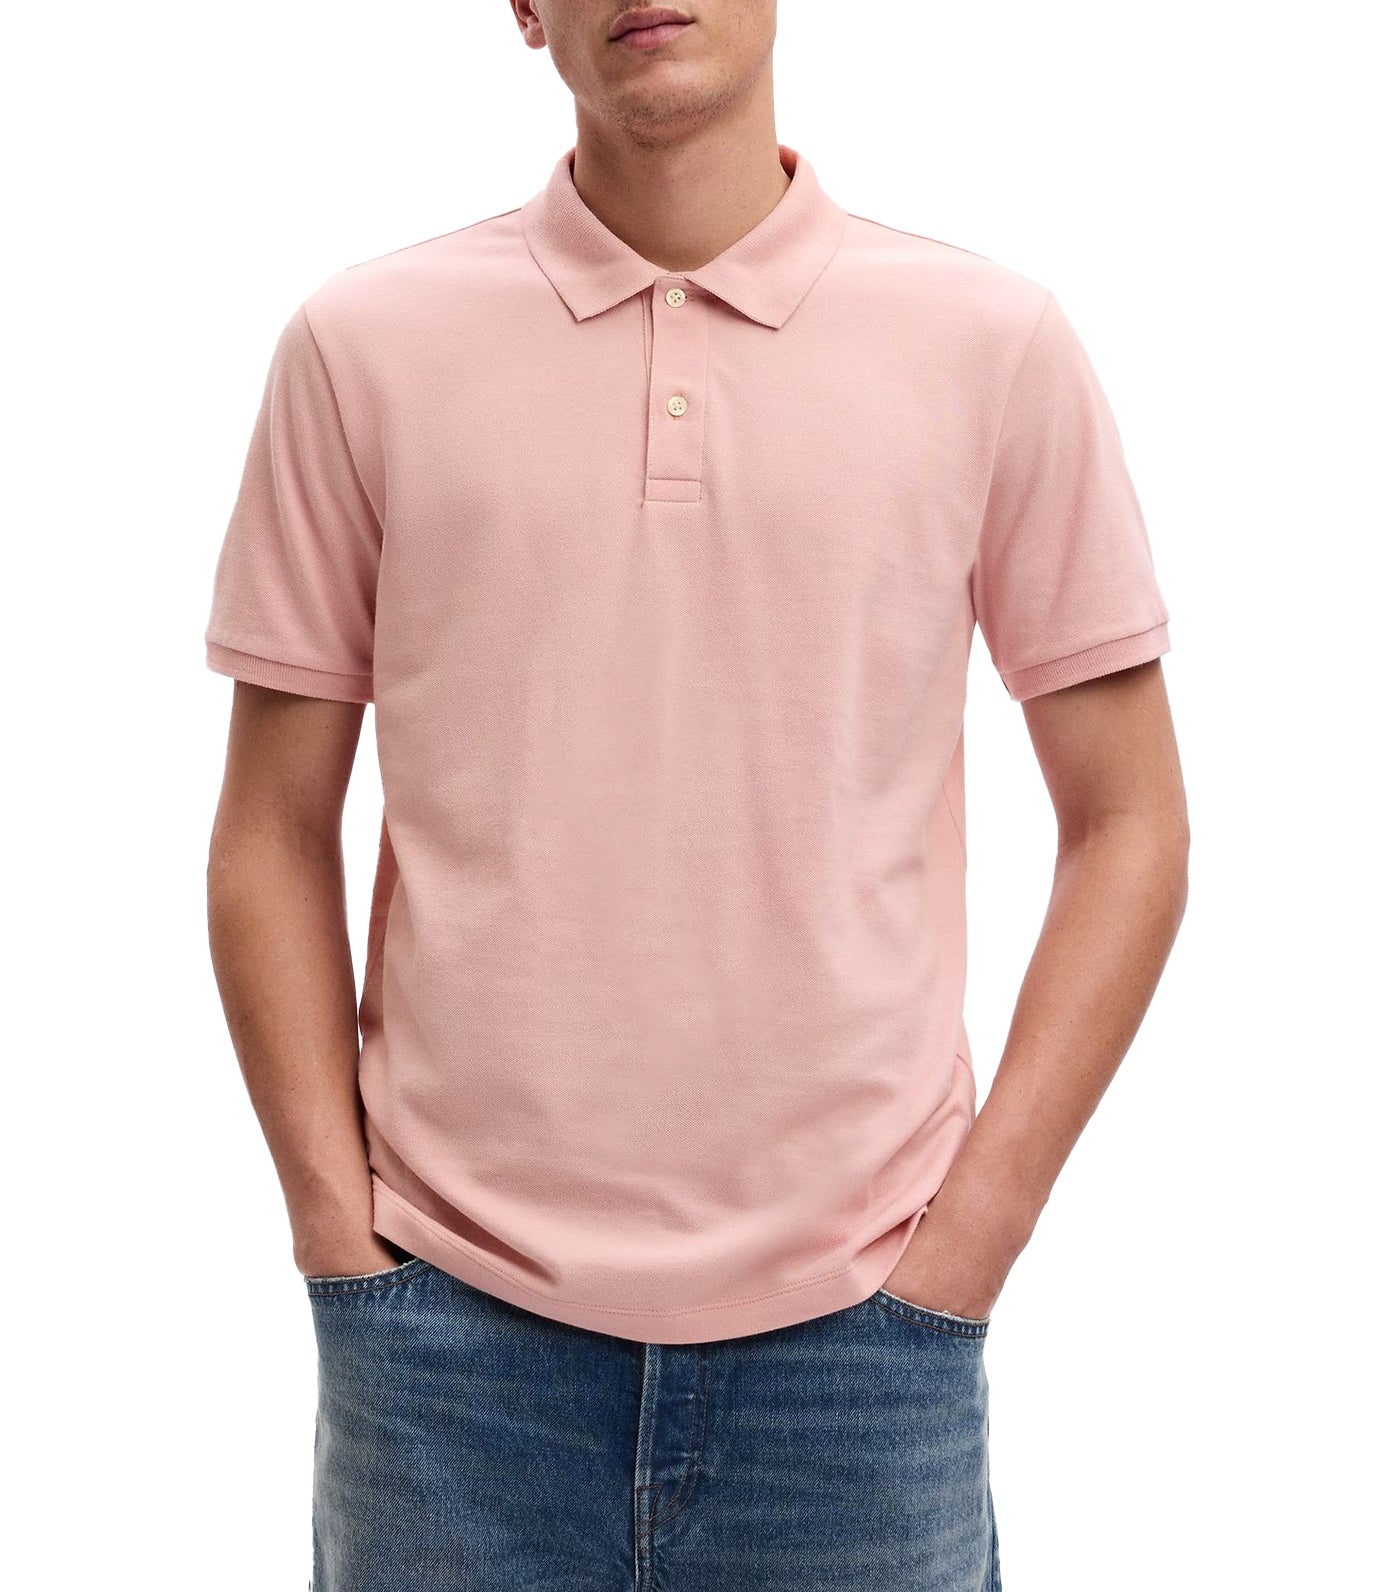 All Day Pique Polo Shirt Pink Standard